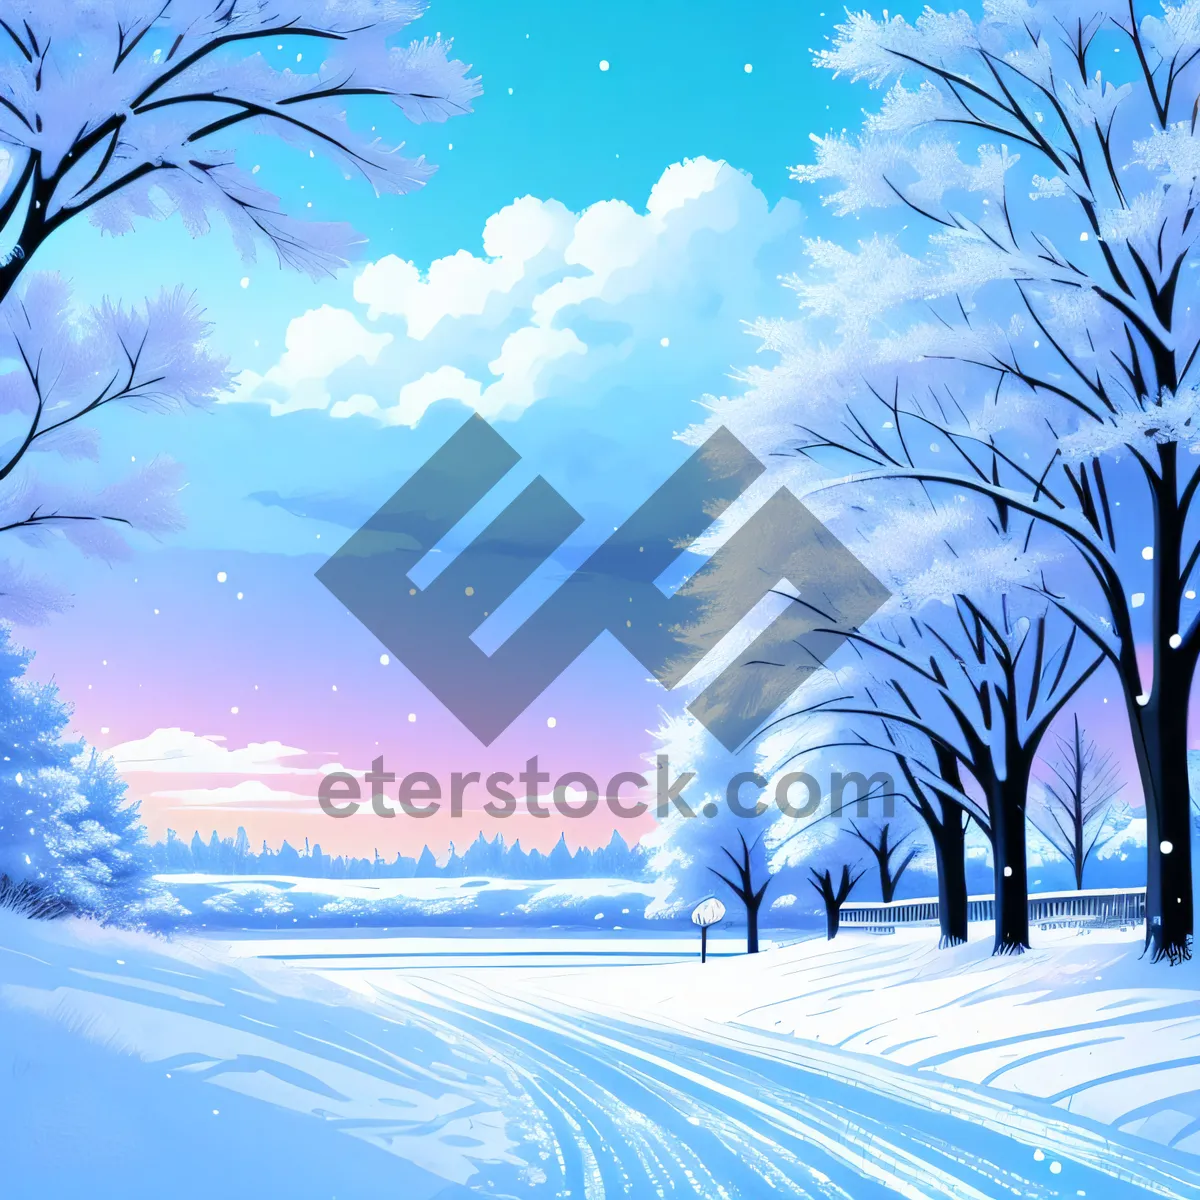 Picture of Snowy Winter Wonderland: A Bright and Frosty Galactic Holiday Sky